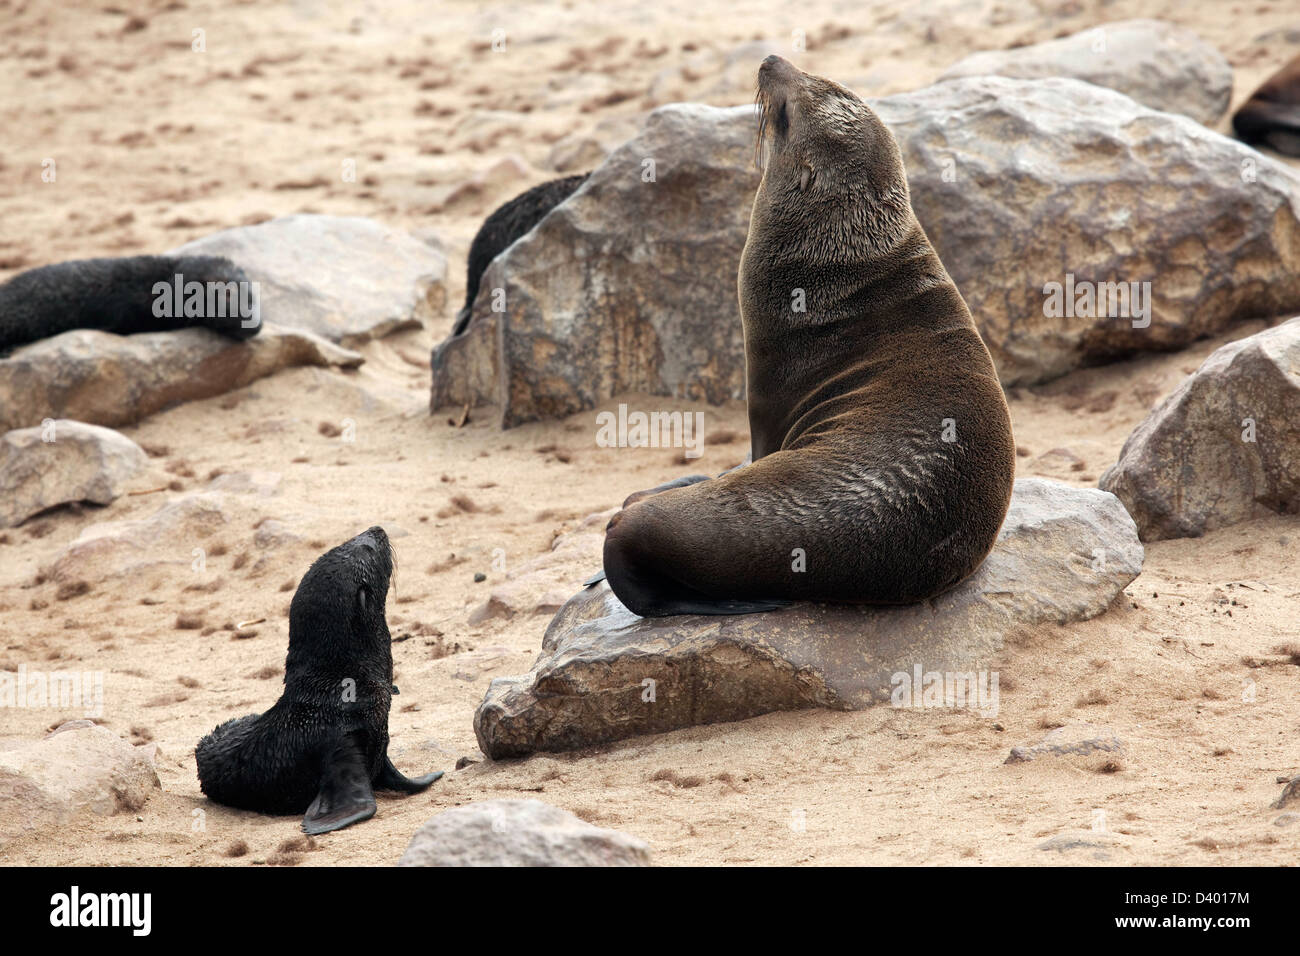 Brown fur seals (Arctocephalus pusillus) female and pups in seal colony, Cape Cross Seal Reserve, Namibia, South Africa Stock Photo